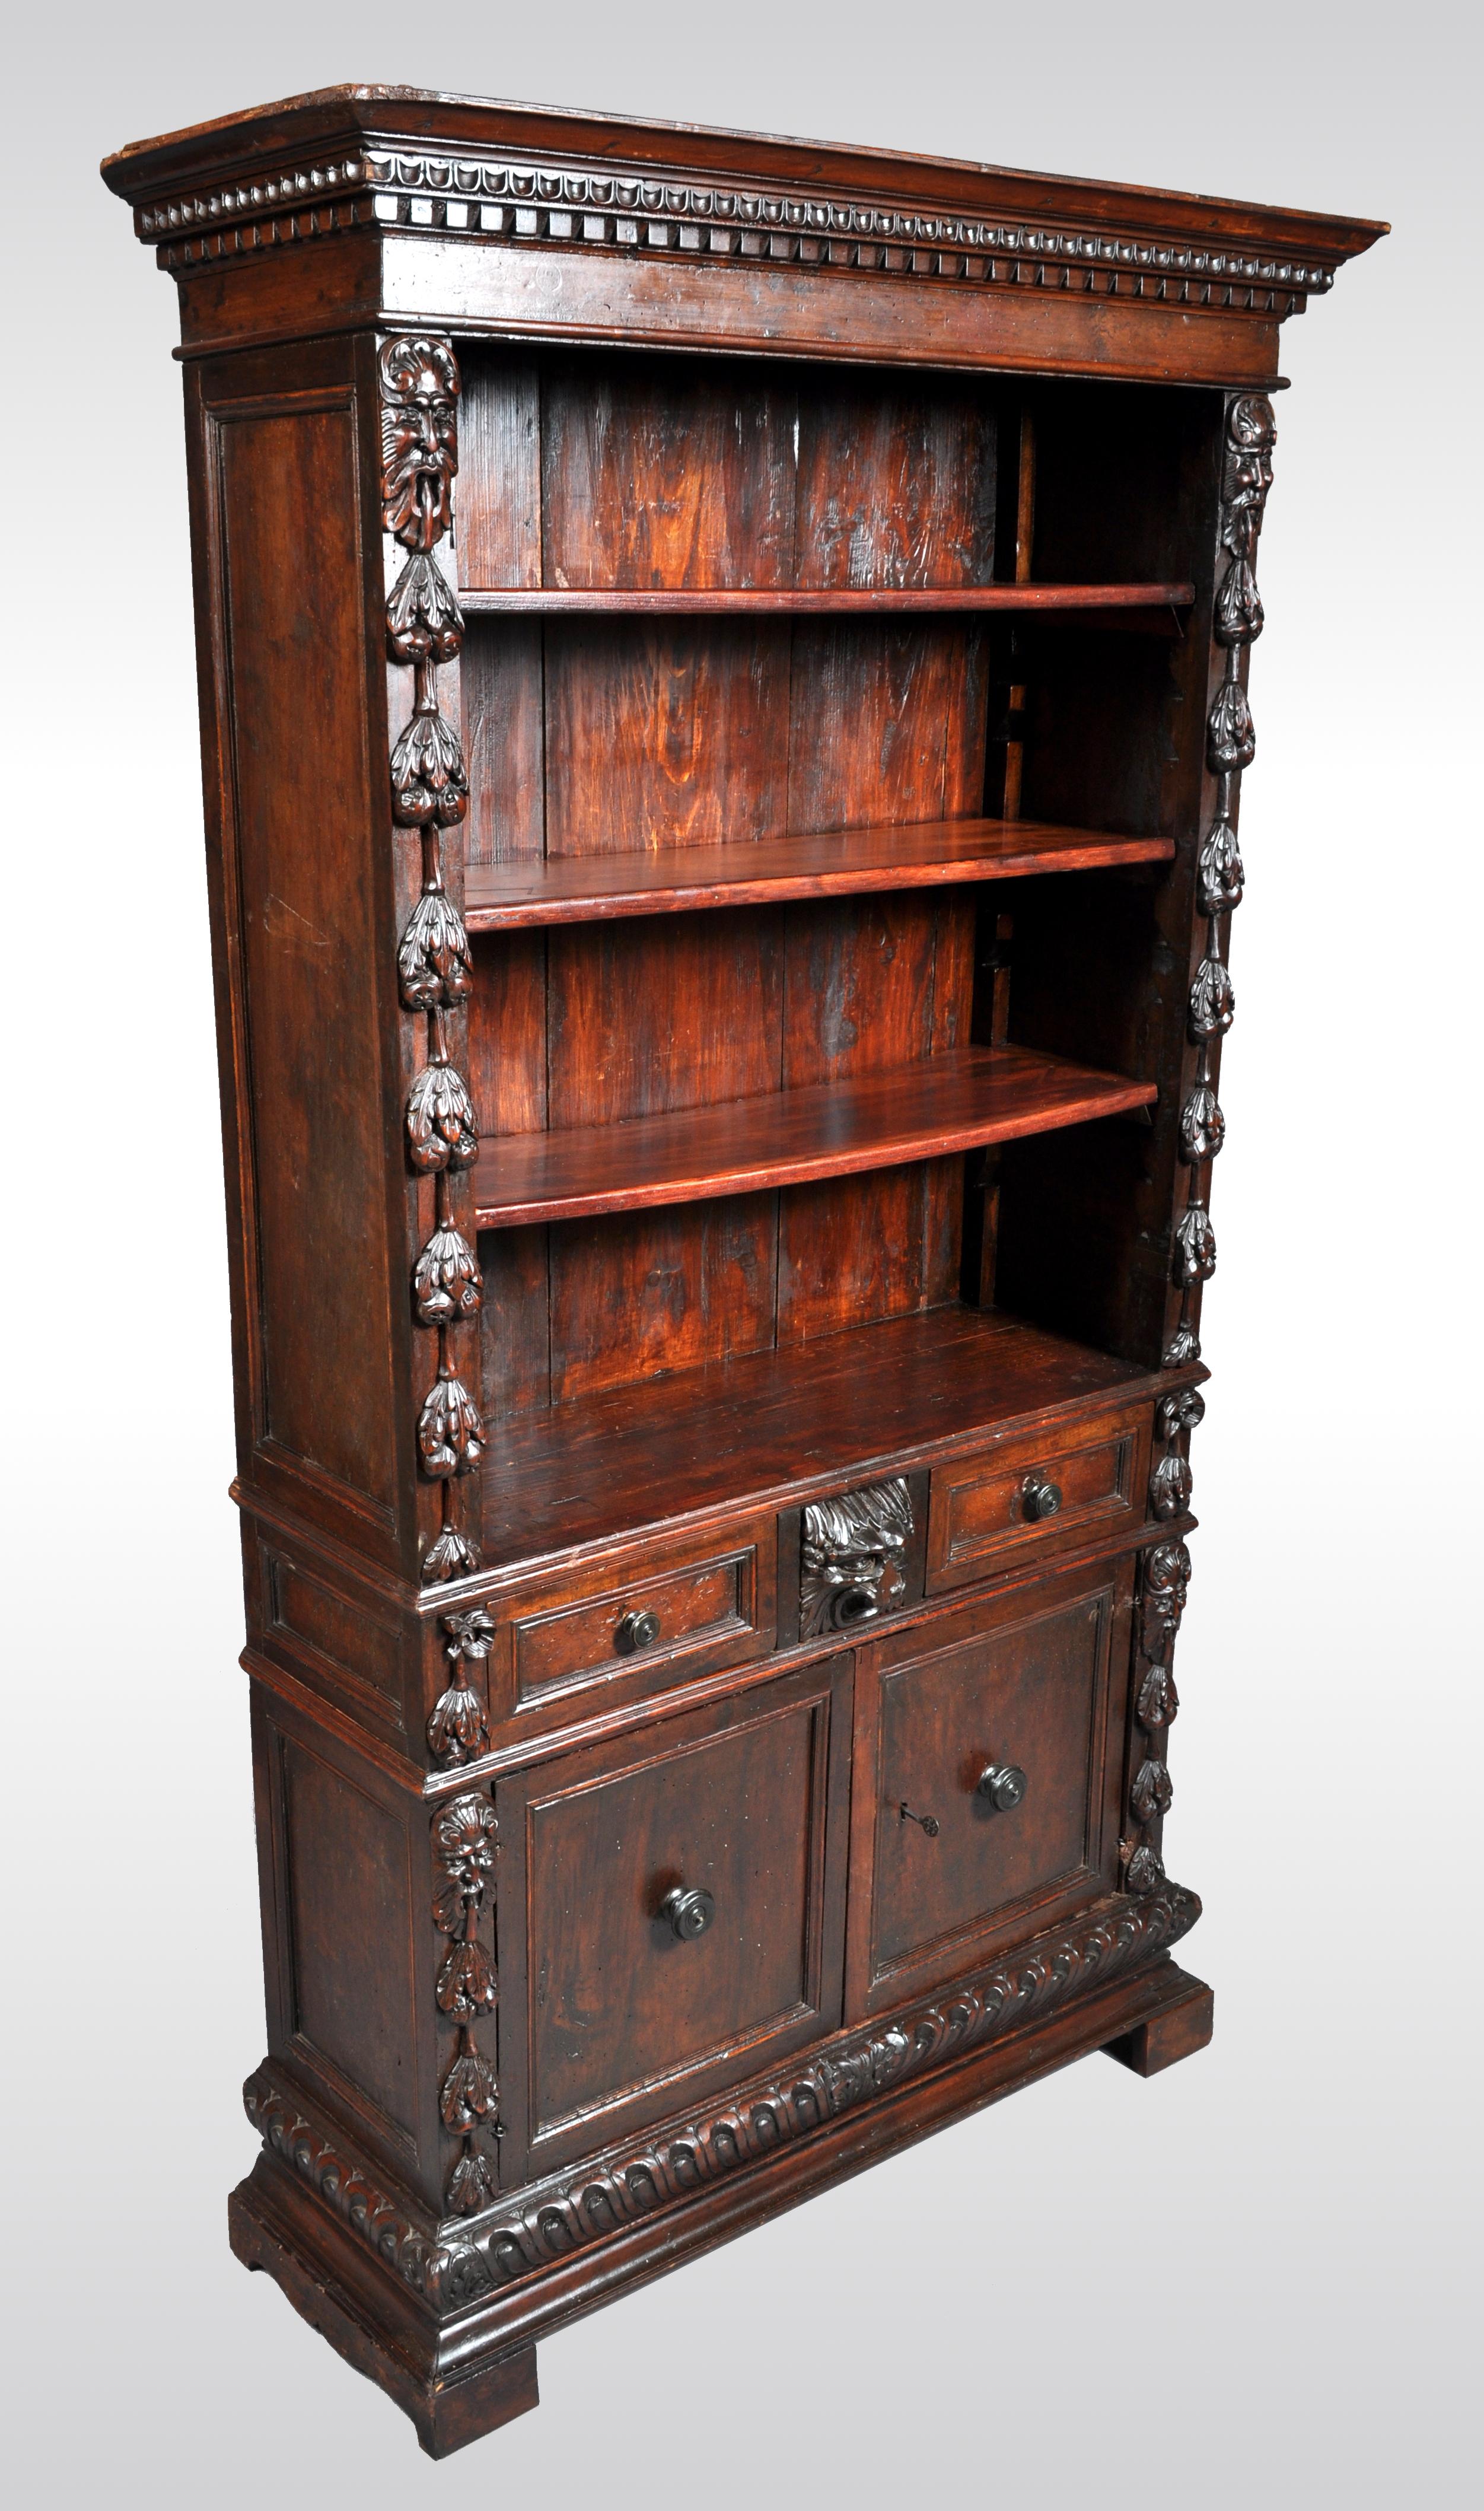 Antique Italian carved walnut renaissance revival bookcase, circa 1870. The bookcase having a protruding cornice with 'egg and dart' and dentil carving, the bookcase is flanked with carved fruits preceded by comical grotesque masks. The base having